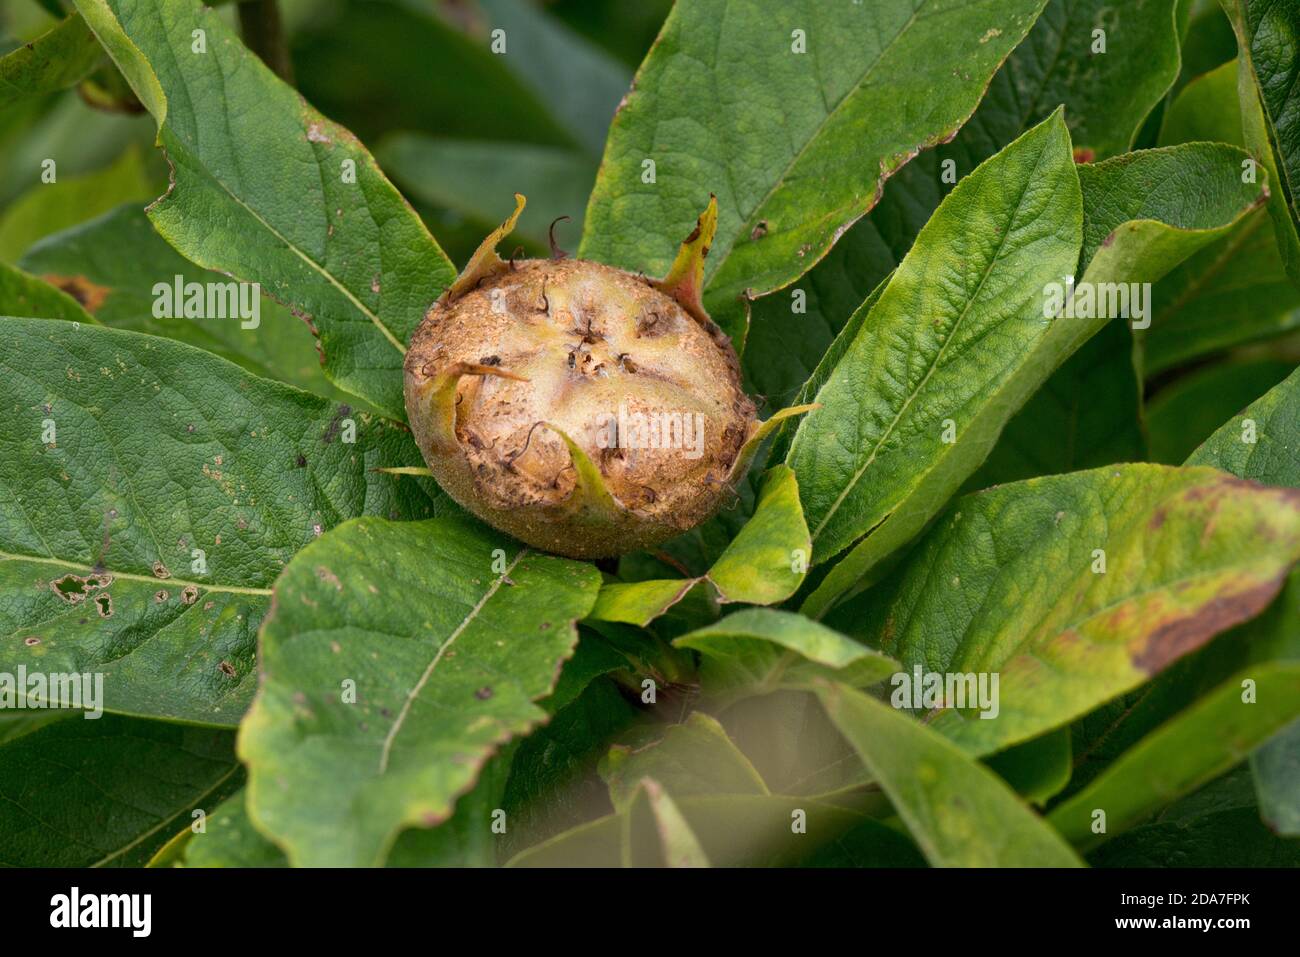 Fruit of a common medlar (Mespilus germanica) tree fully developed but before bletting, Berkshire, August Stock Photo